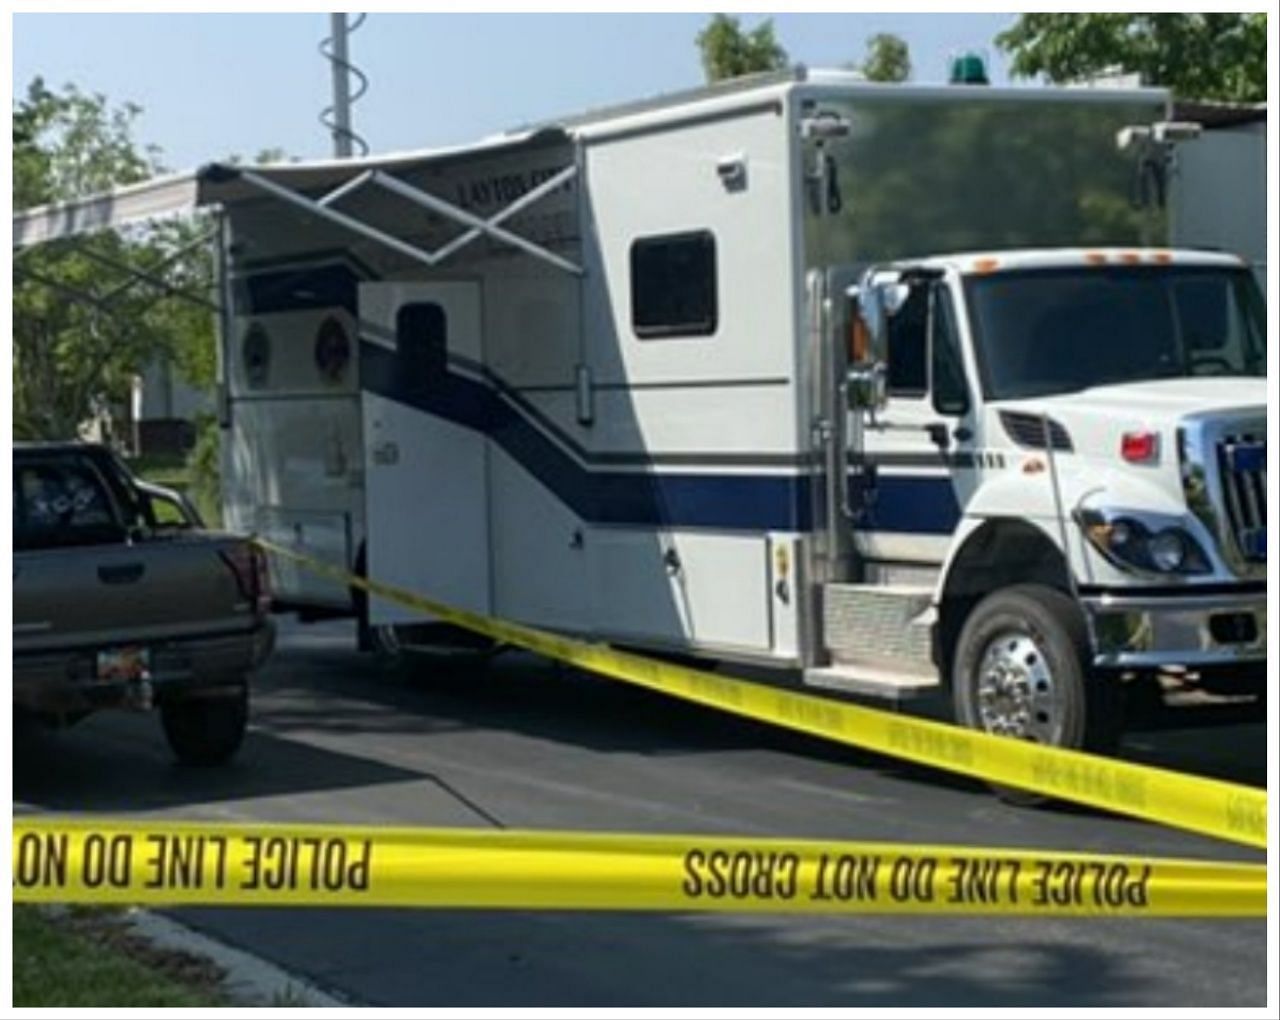 Officers found bodies in separate rooms of the house (Image via Layton PD)